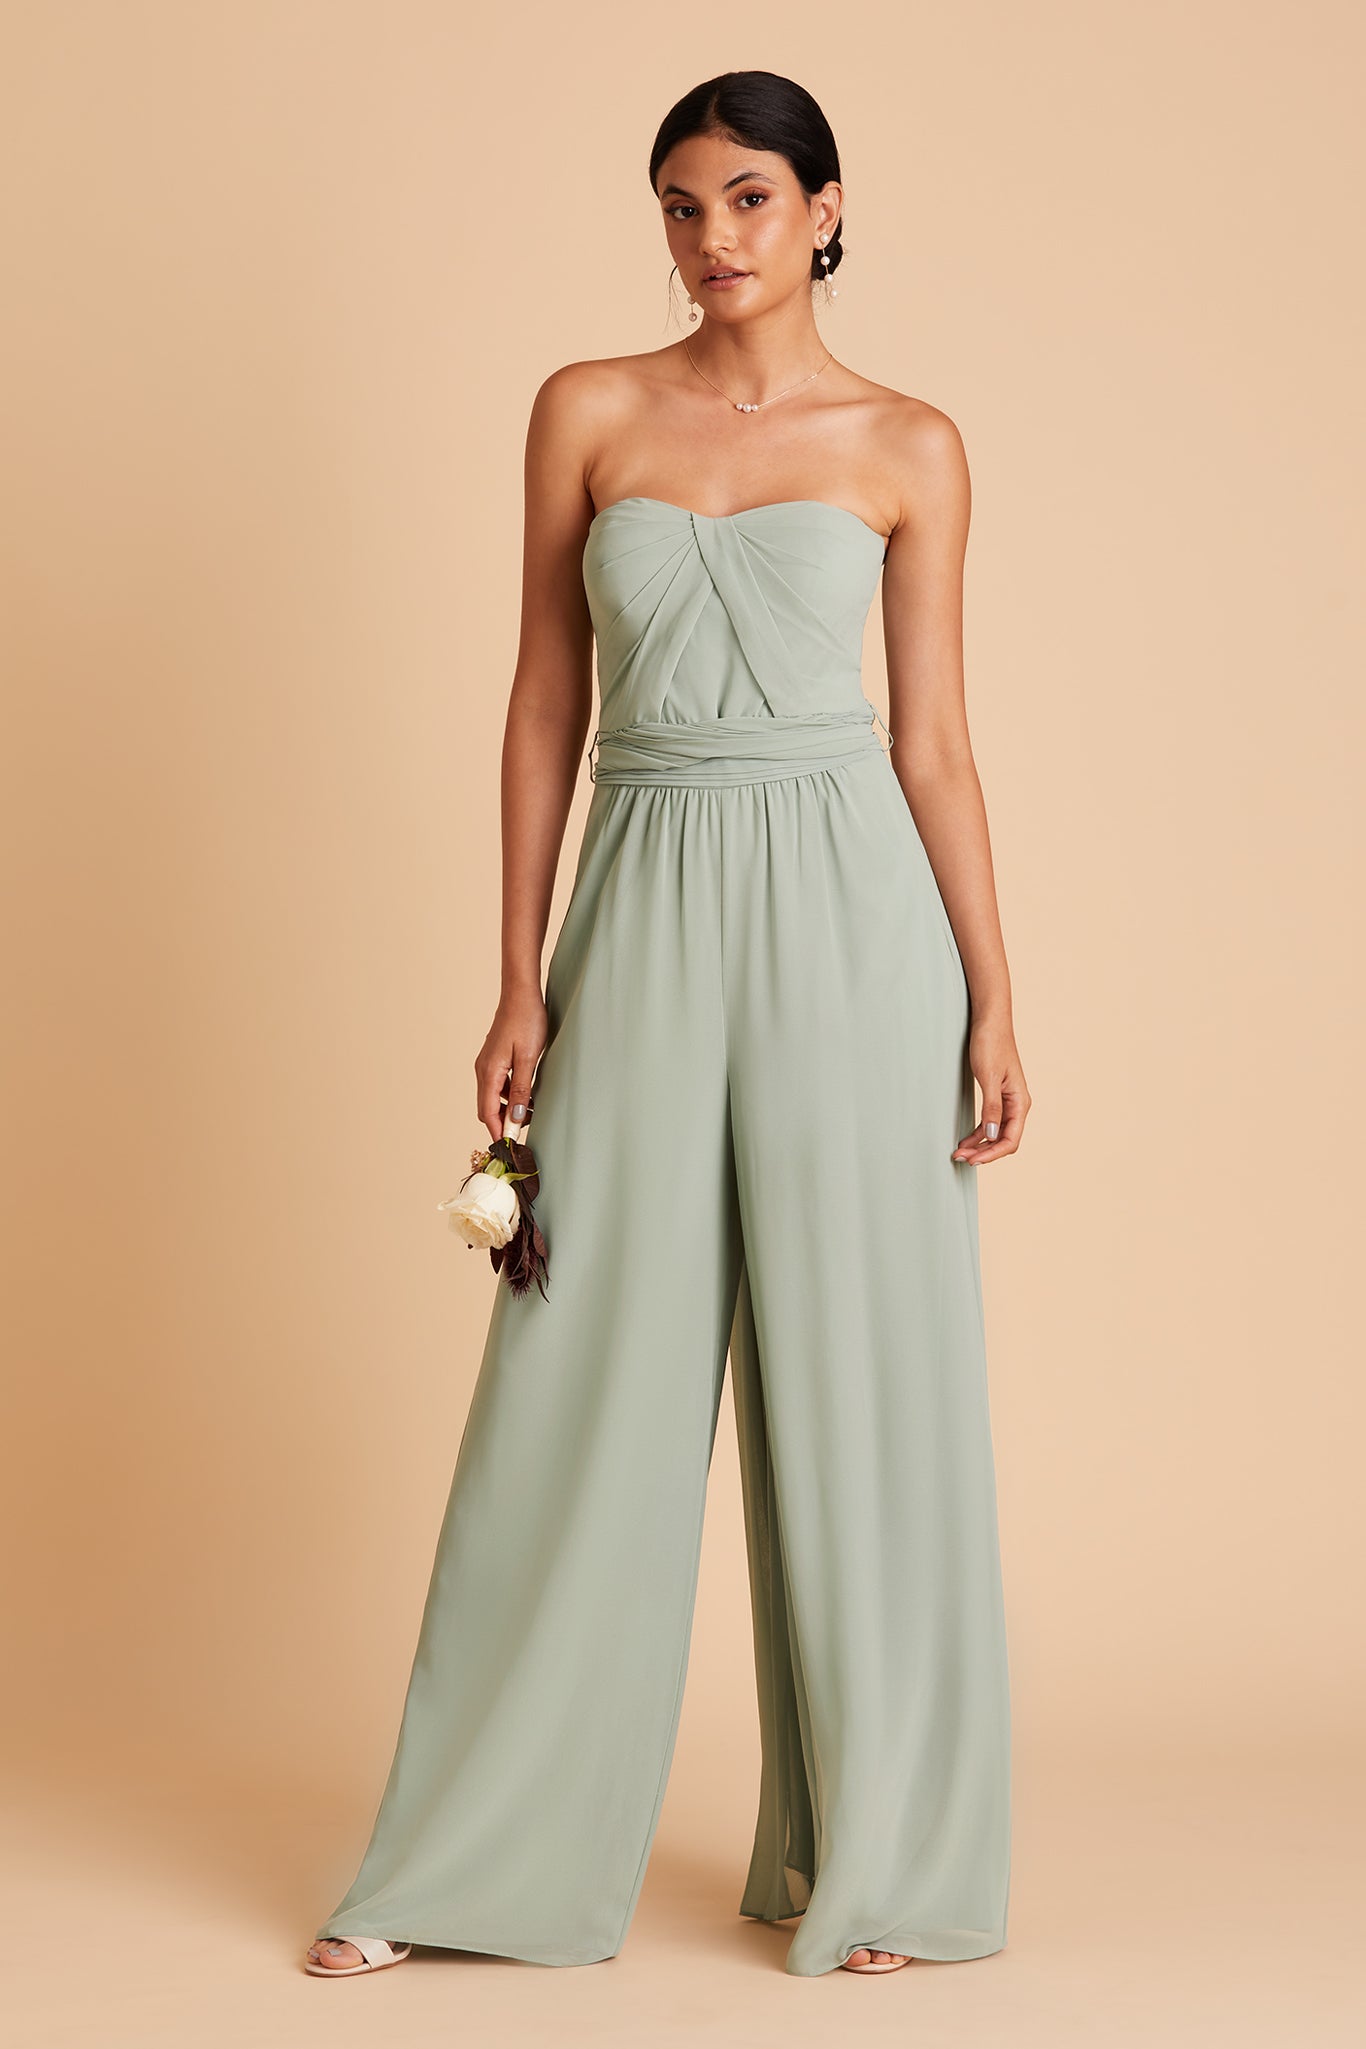 Gigi convertible jumpsuit in sage chiffon by Birdy Grey, front view